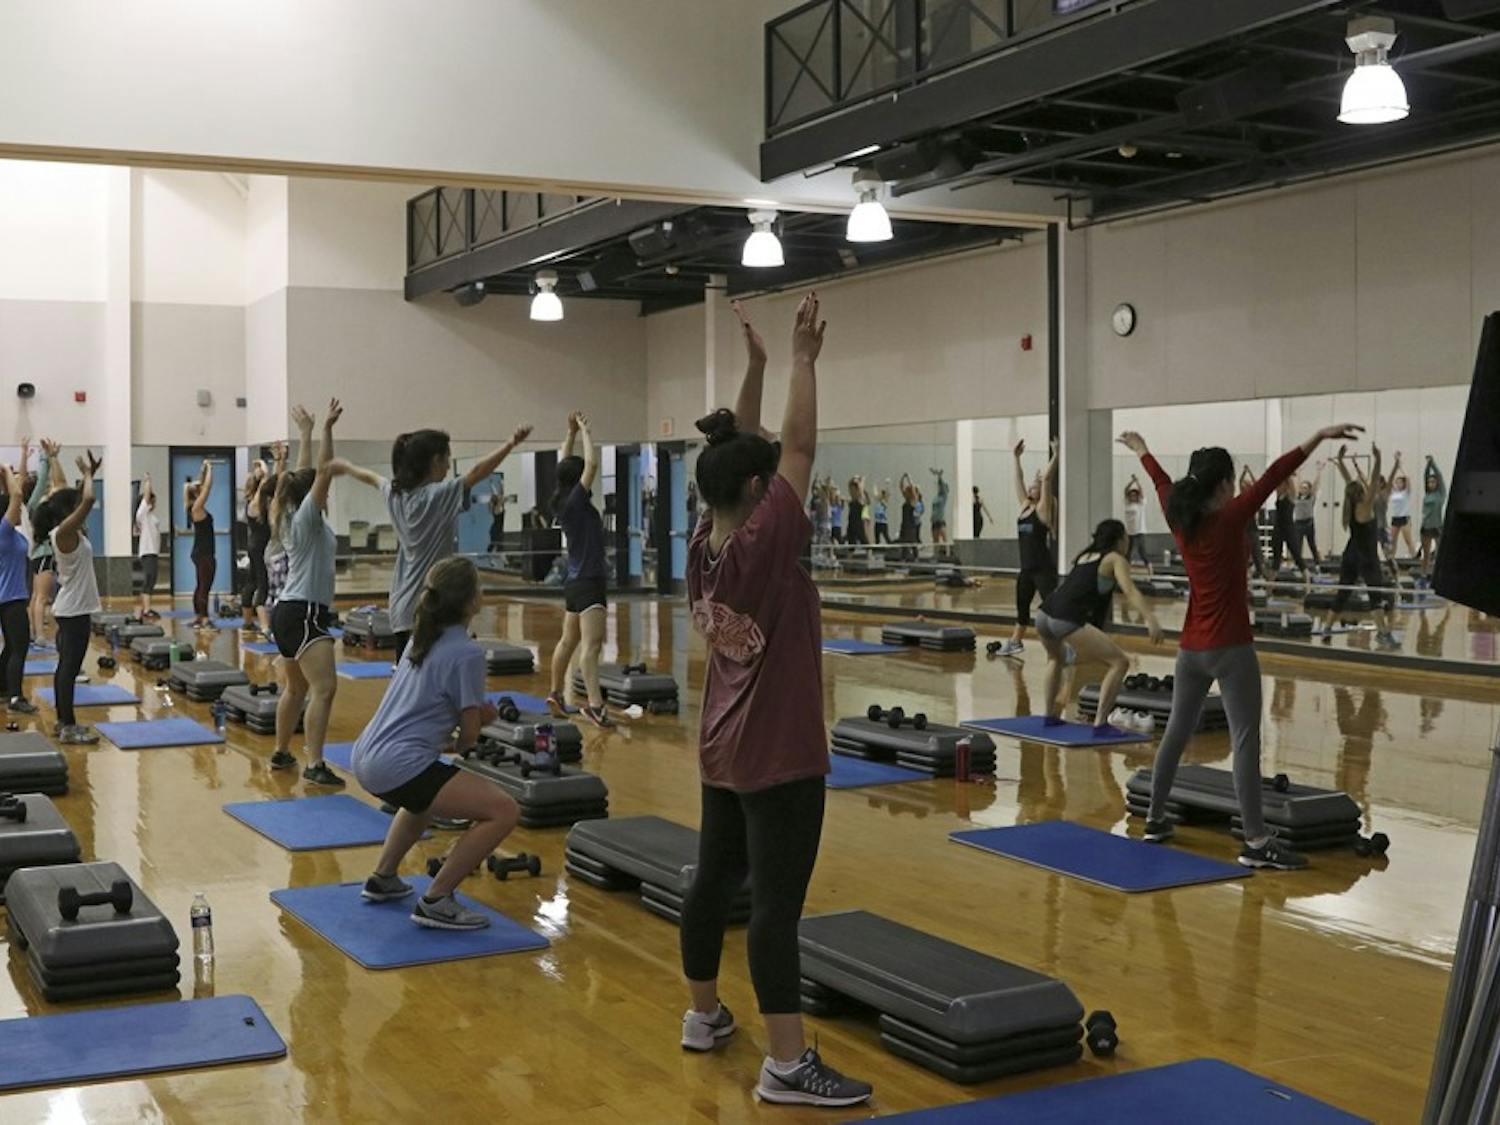 Students, faculty and employees participate in exercise classes in the Student Recreation Center on Jan. 24, 2017.